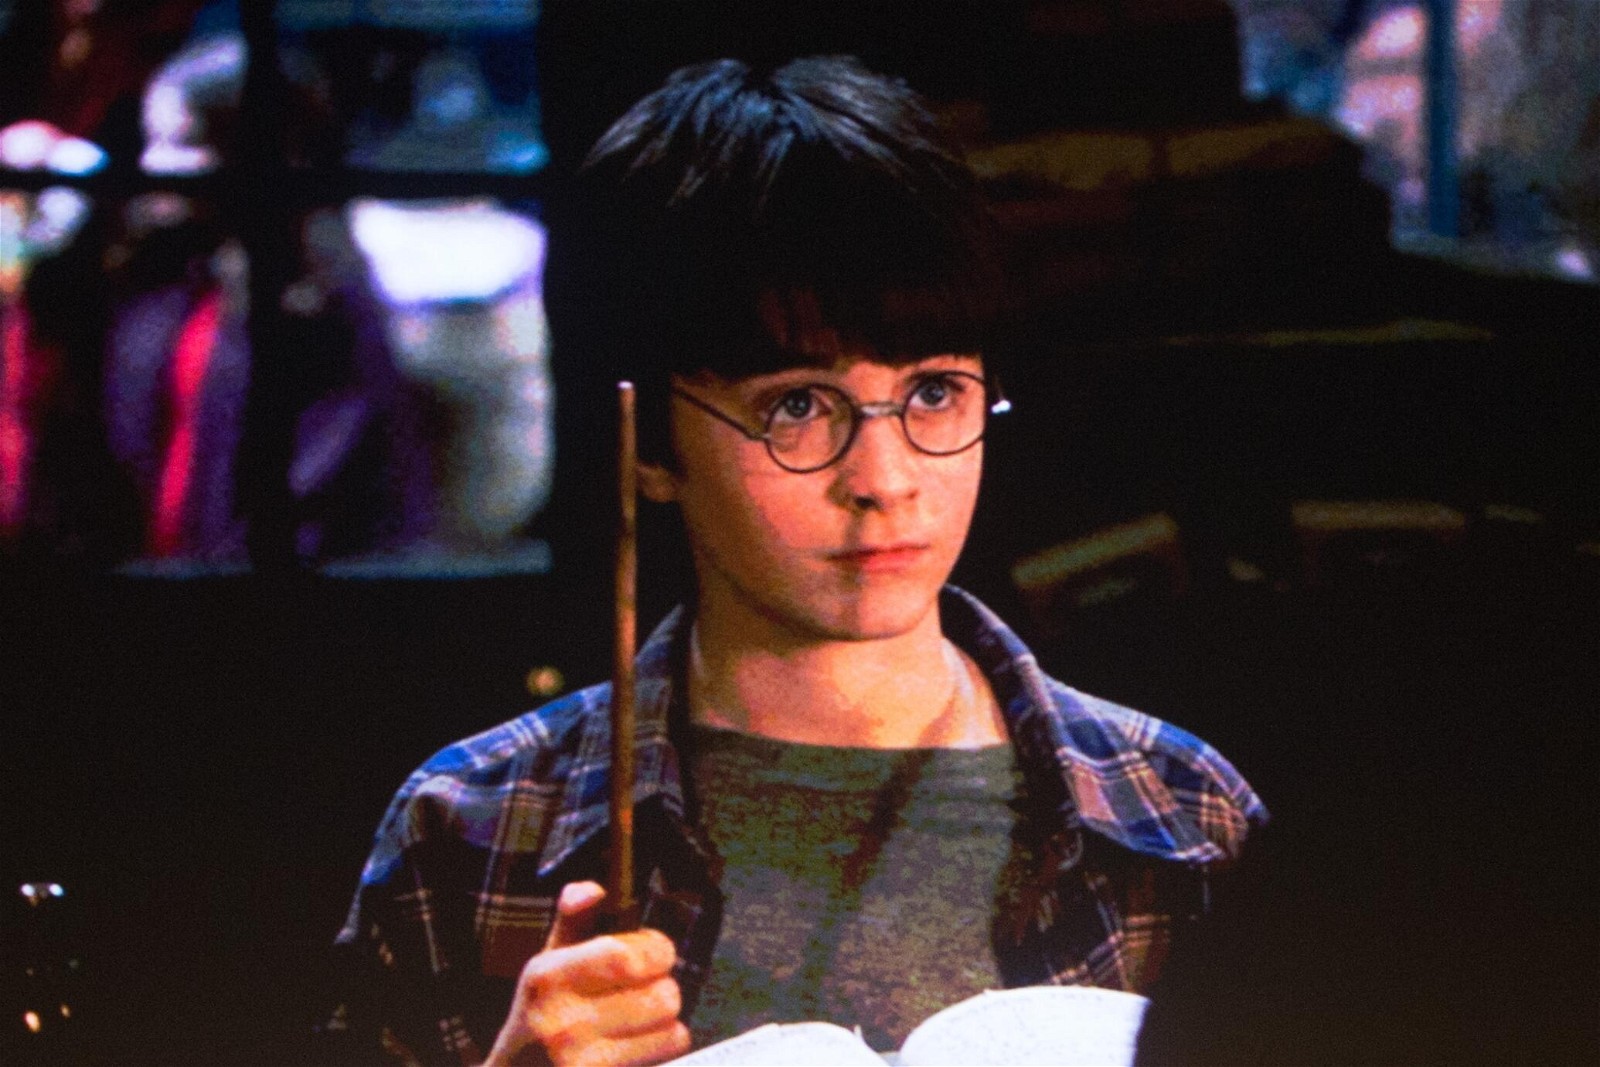 Daniel Radcliffe as the young Harry Potter from the film franchise 